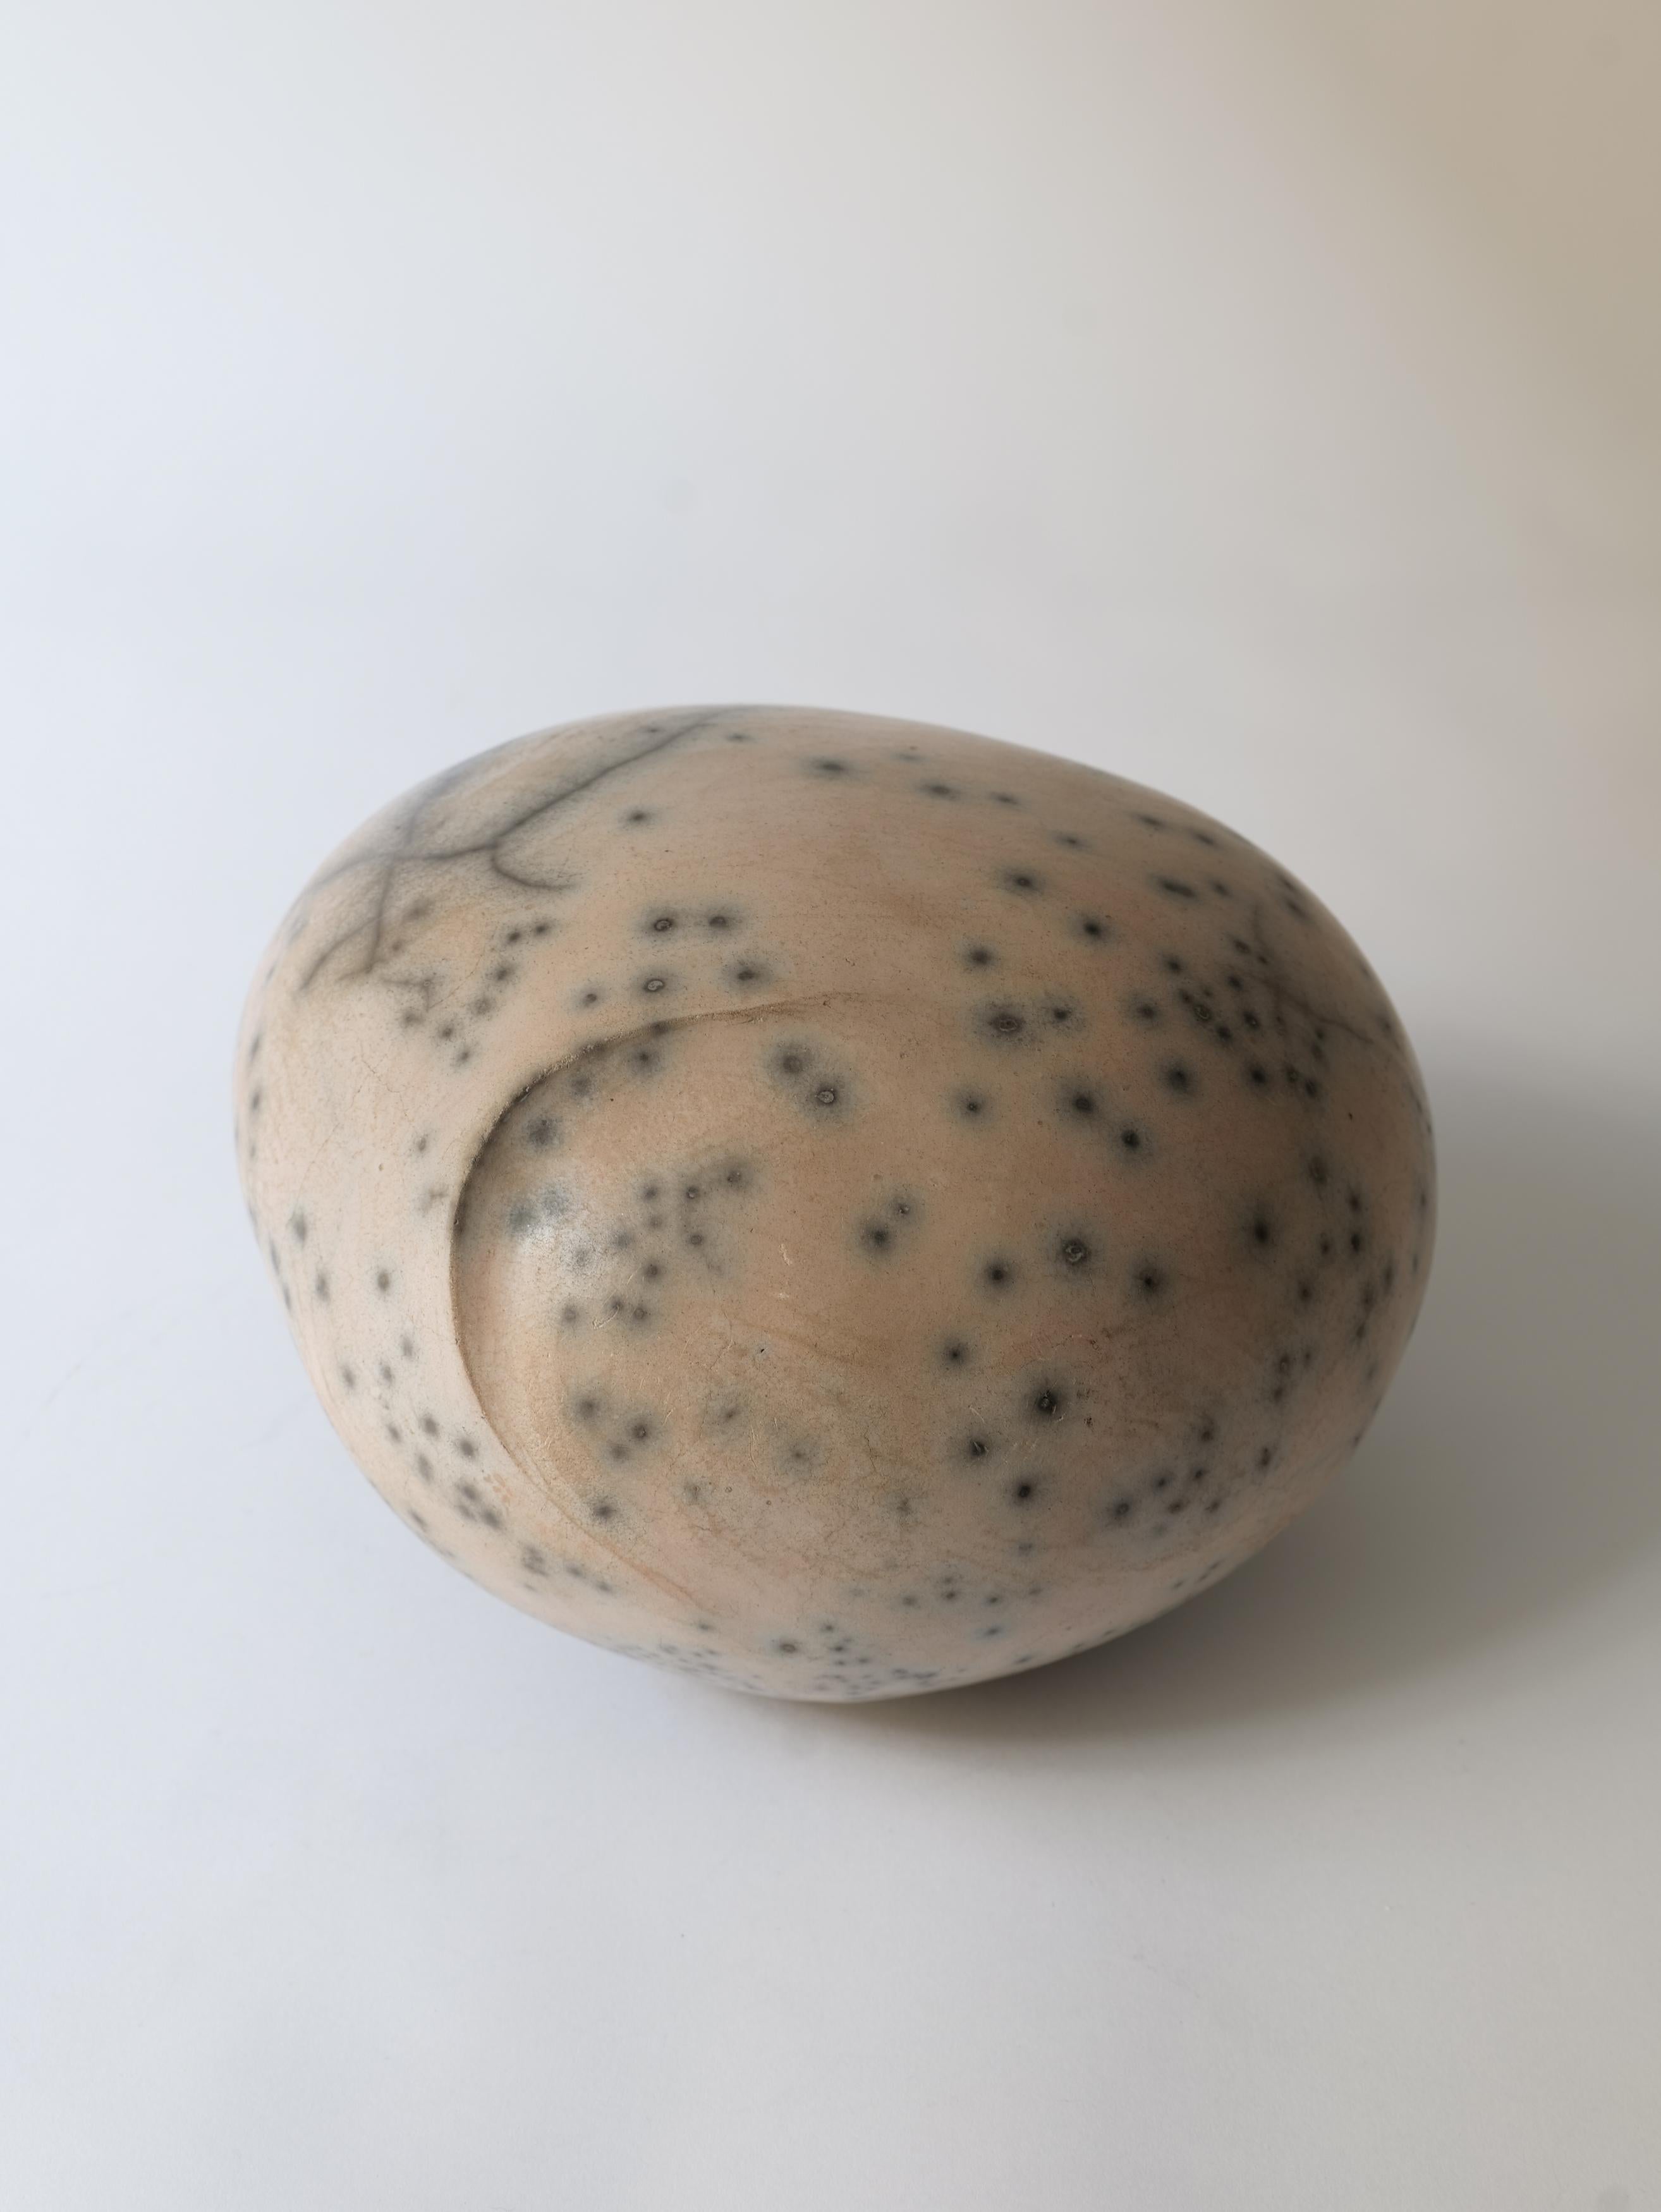 A polished stoneware ceramic sculpture by the contemporary French ceramic artist, Dominic Legros. Reminiscent of wet pebbles in nature the smooth surface is created with intense hand polishing of the surface after firing to reveal variations and